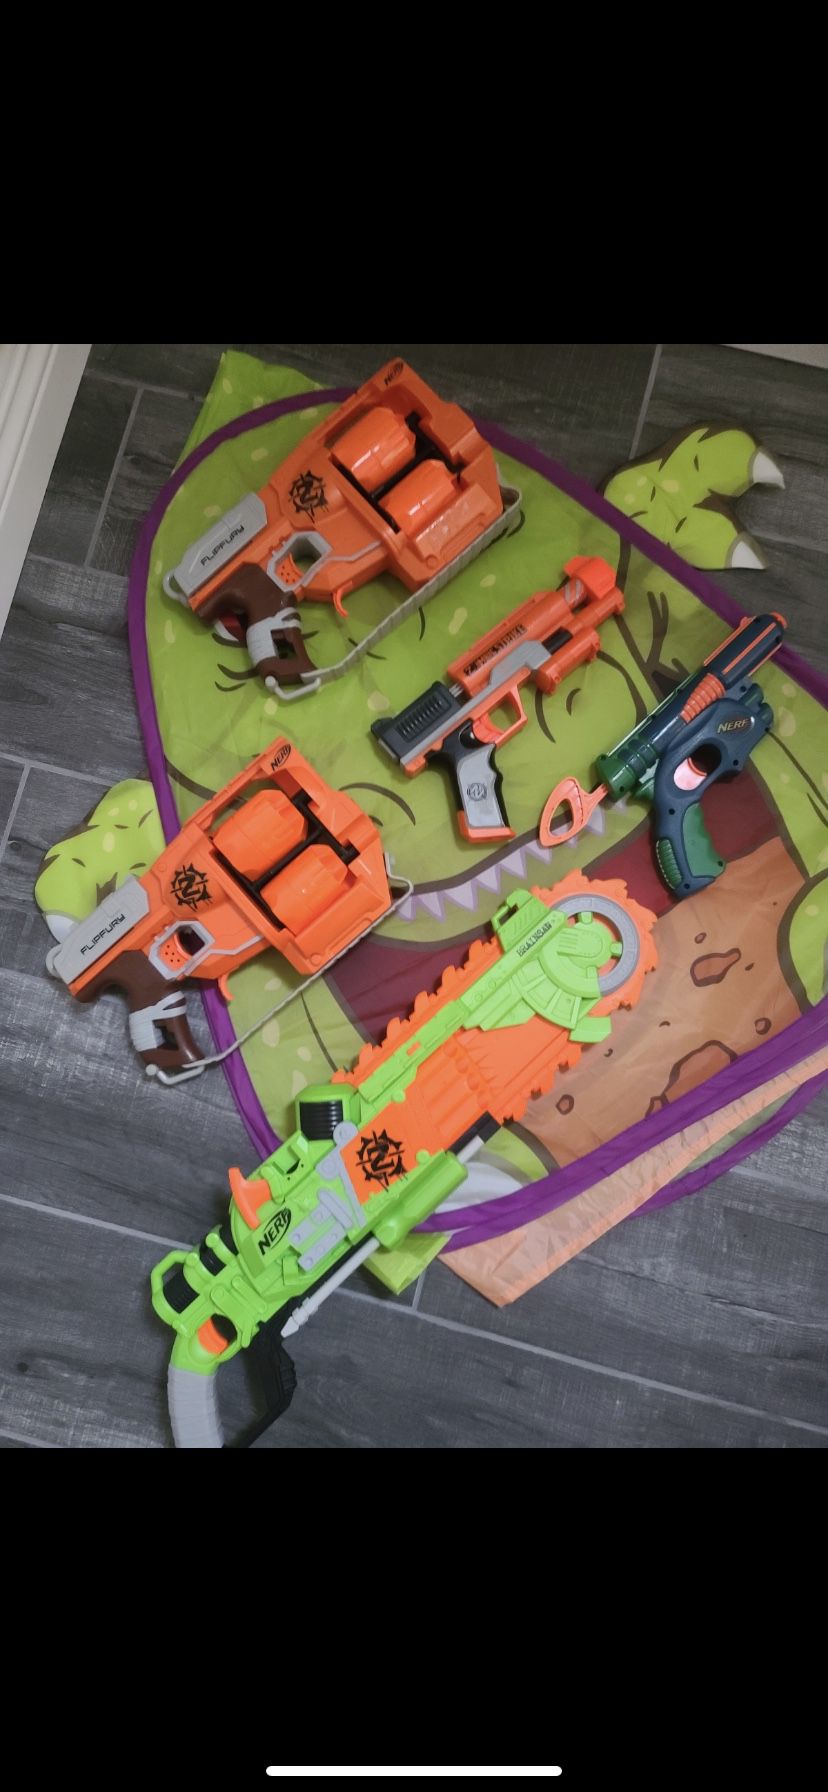 Zombie Nerf guns - they are special edition.